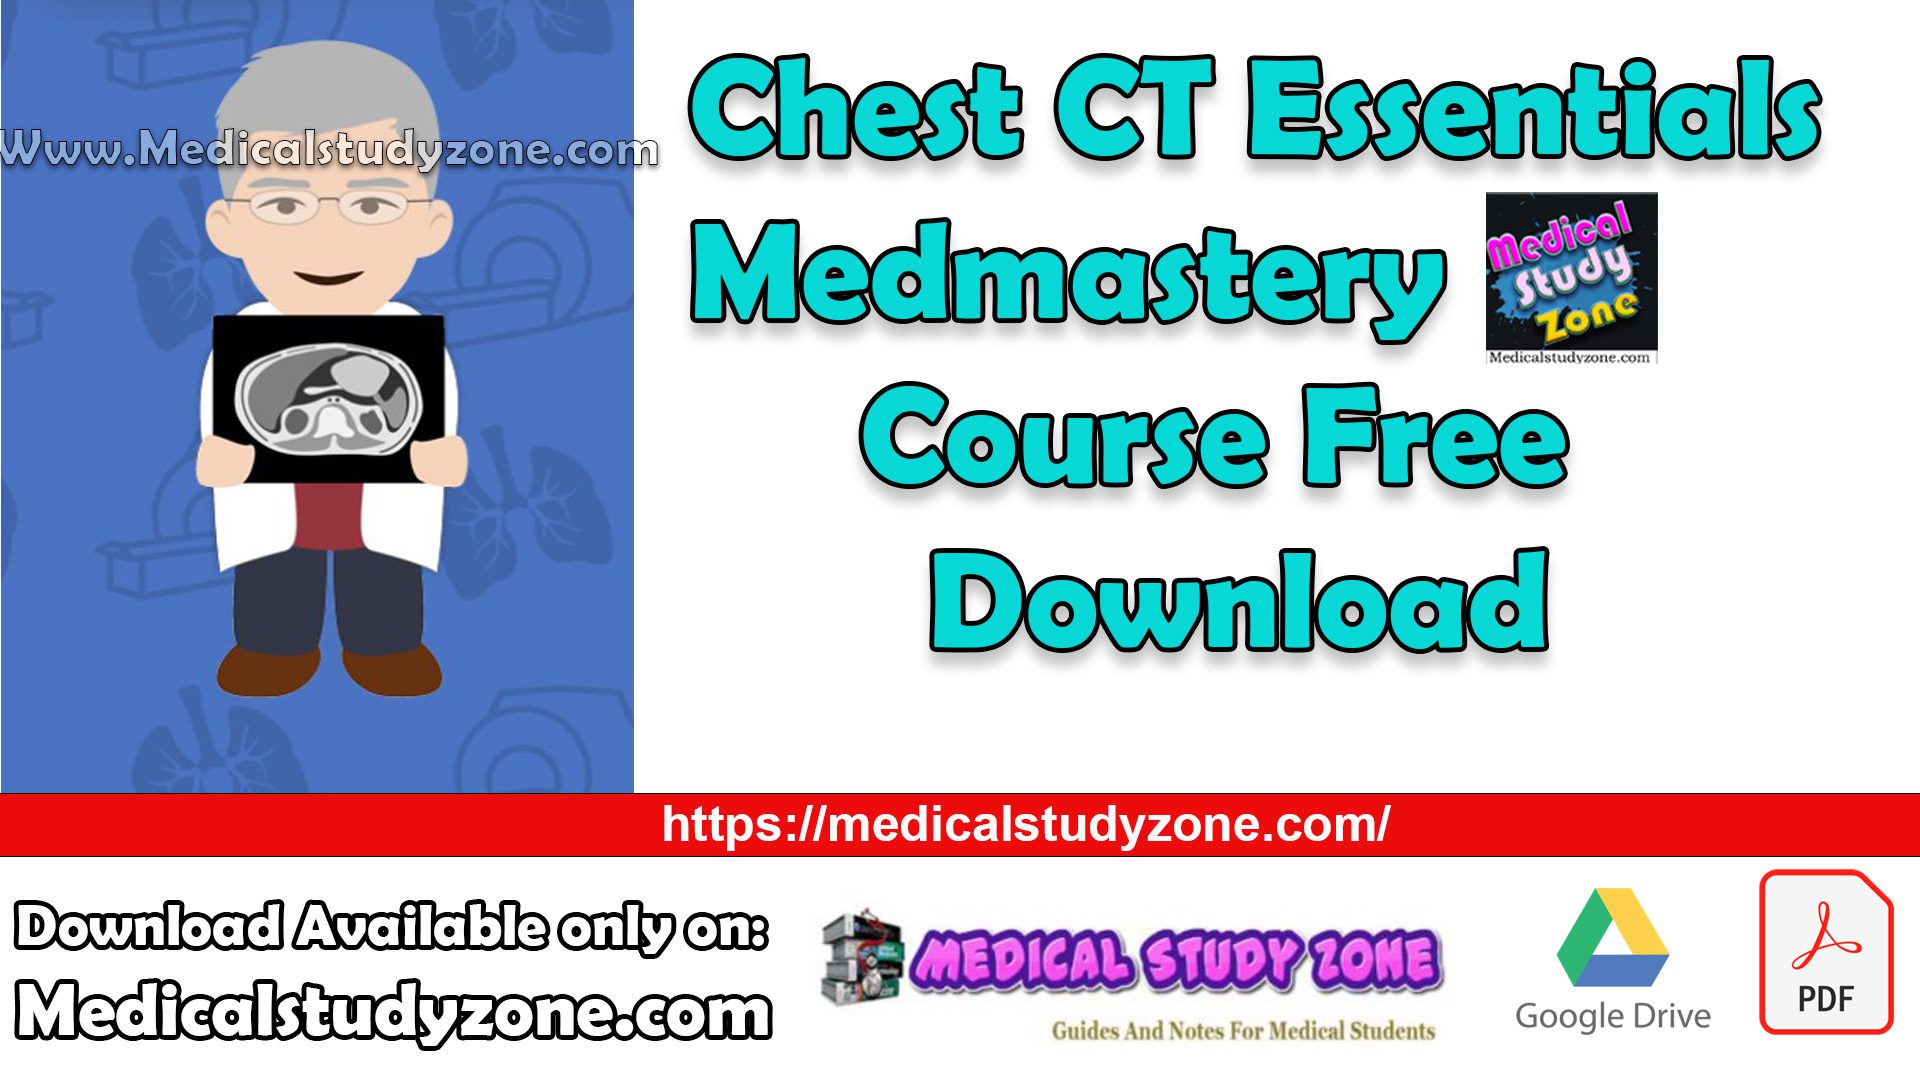 Chest CT Essentials Medmastery Course Free Download